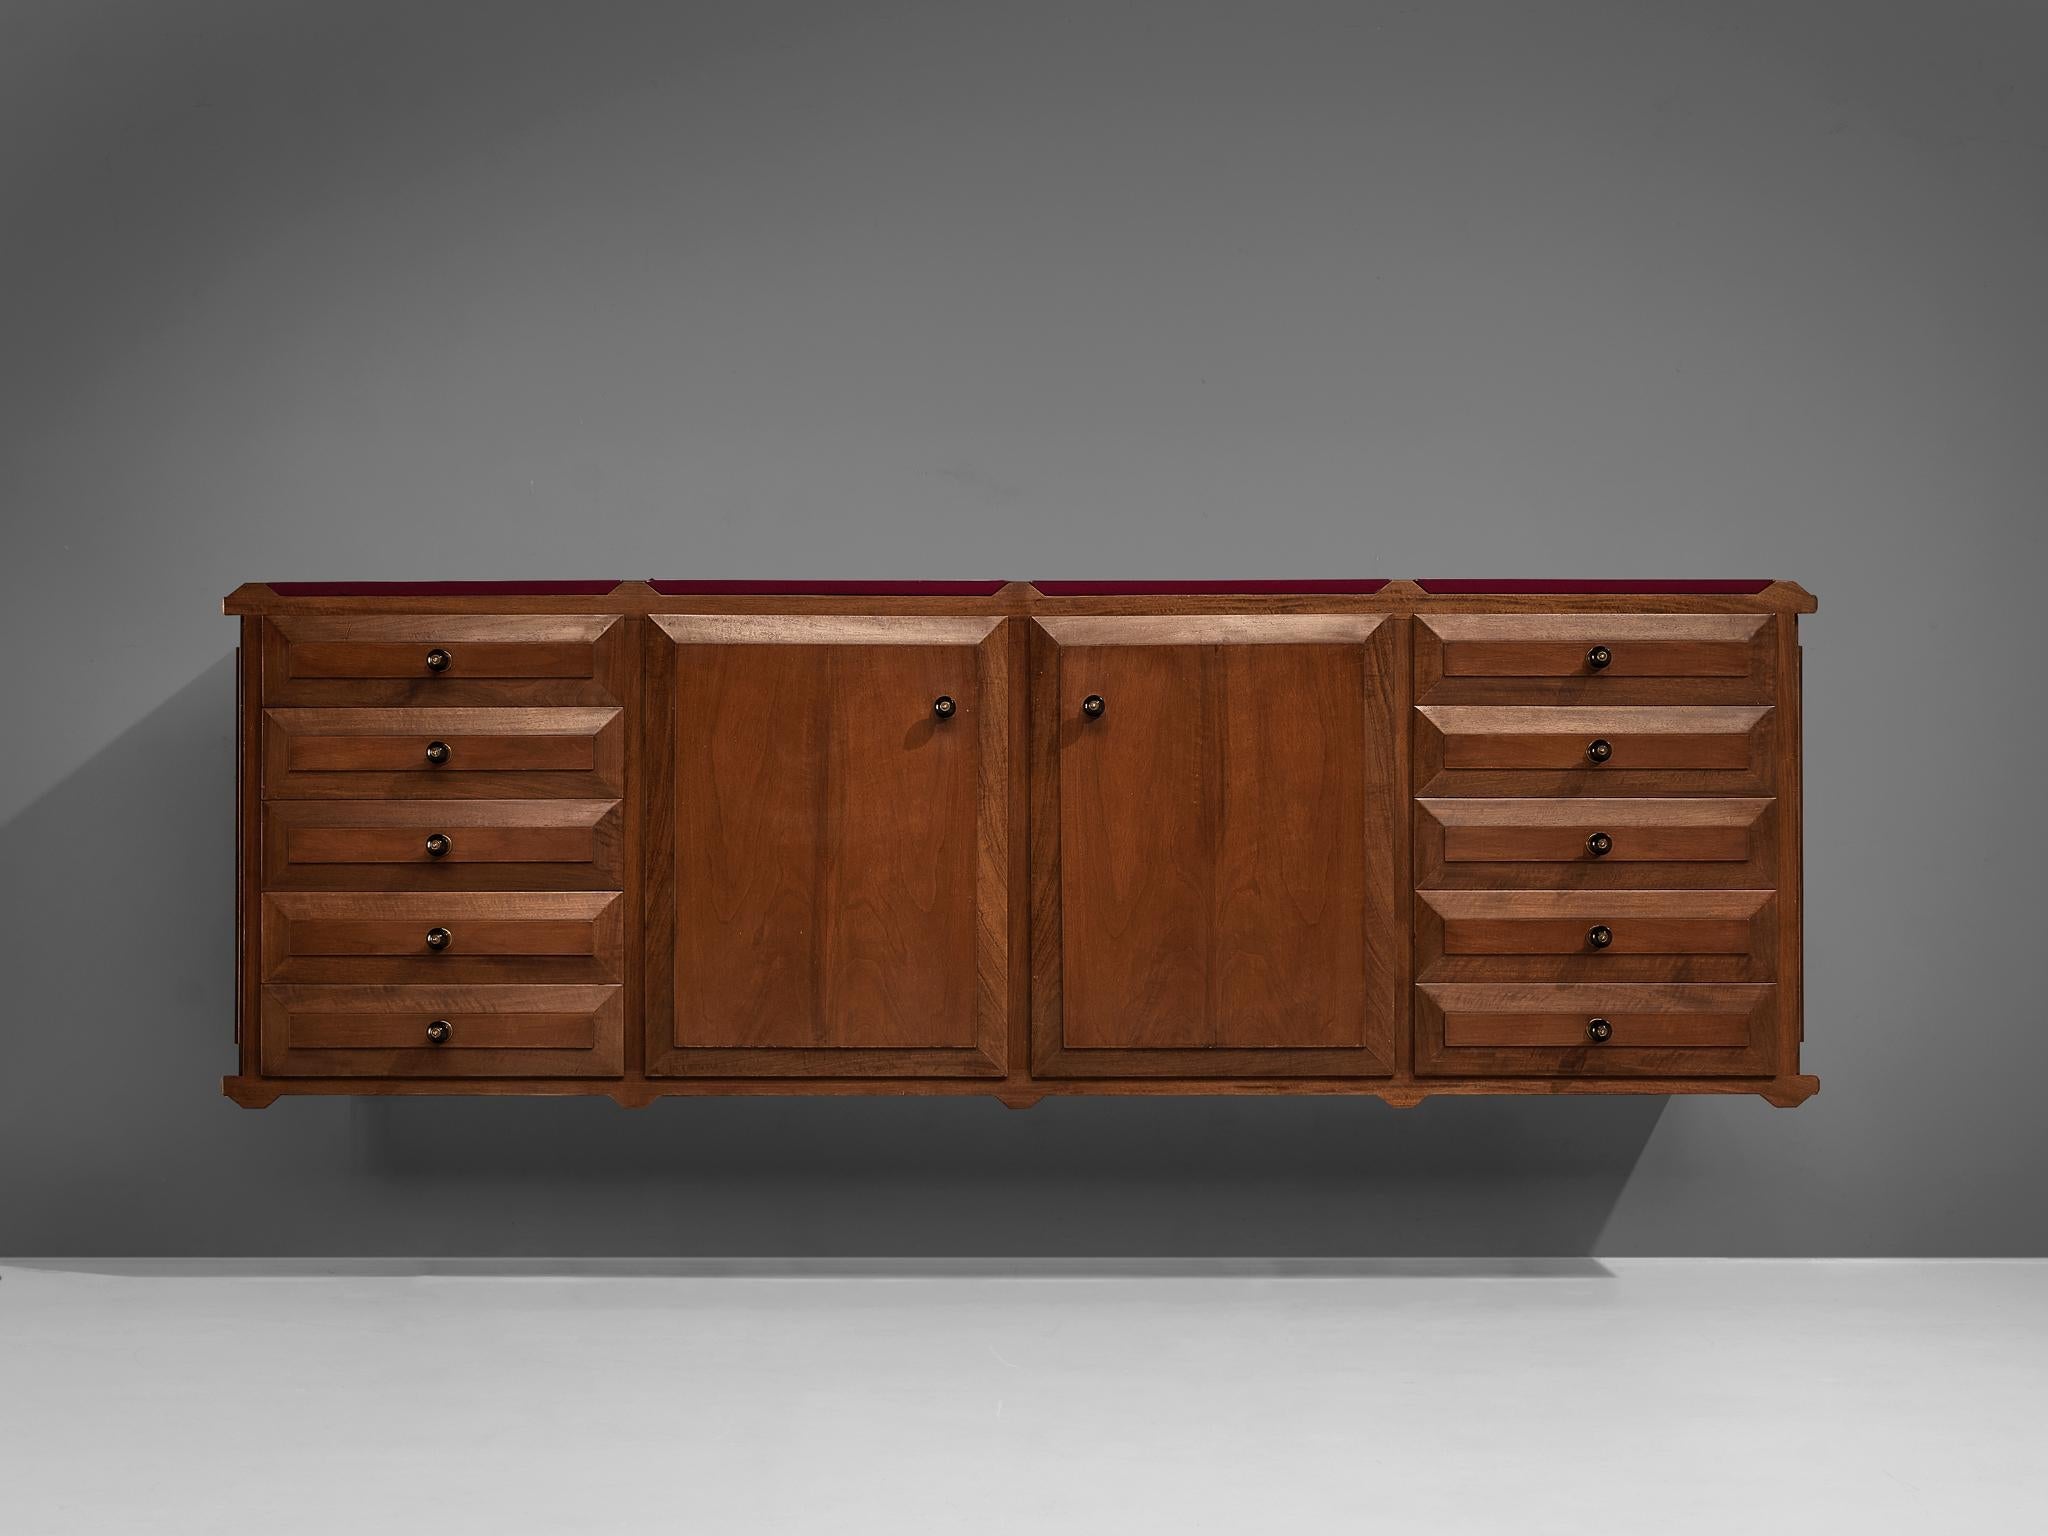 Italian Sideboard with Drawers in Walnut with Brass Handles